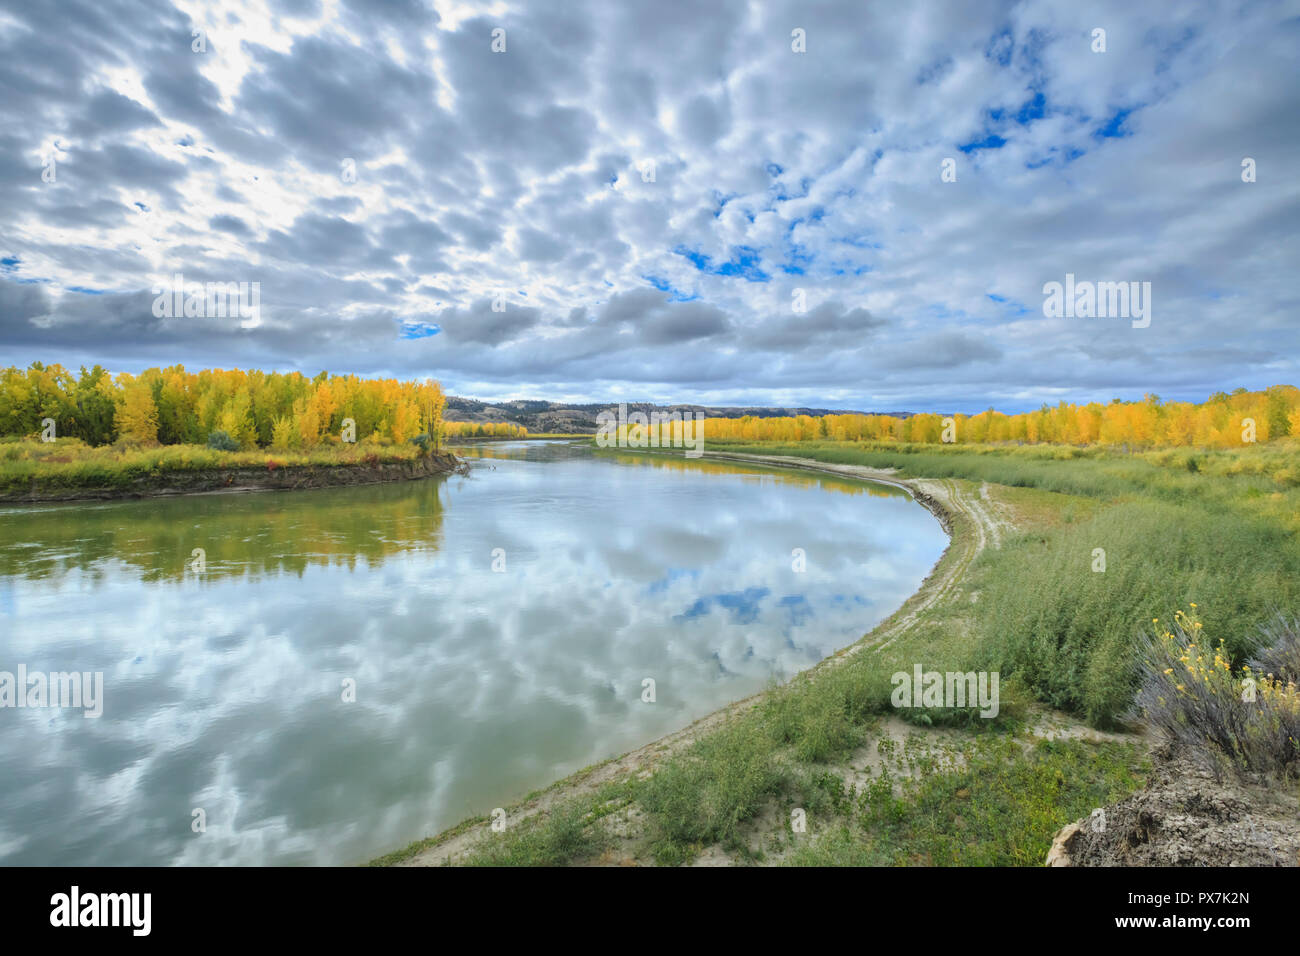 fall colors along the missouri river in the c.m. russell national wildlife refuge near landusky, montana Stock Photo